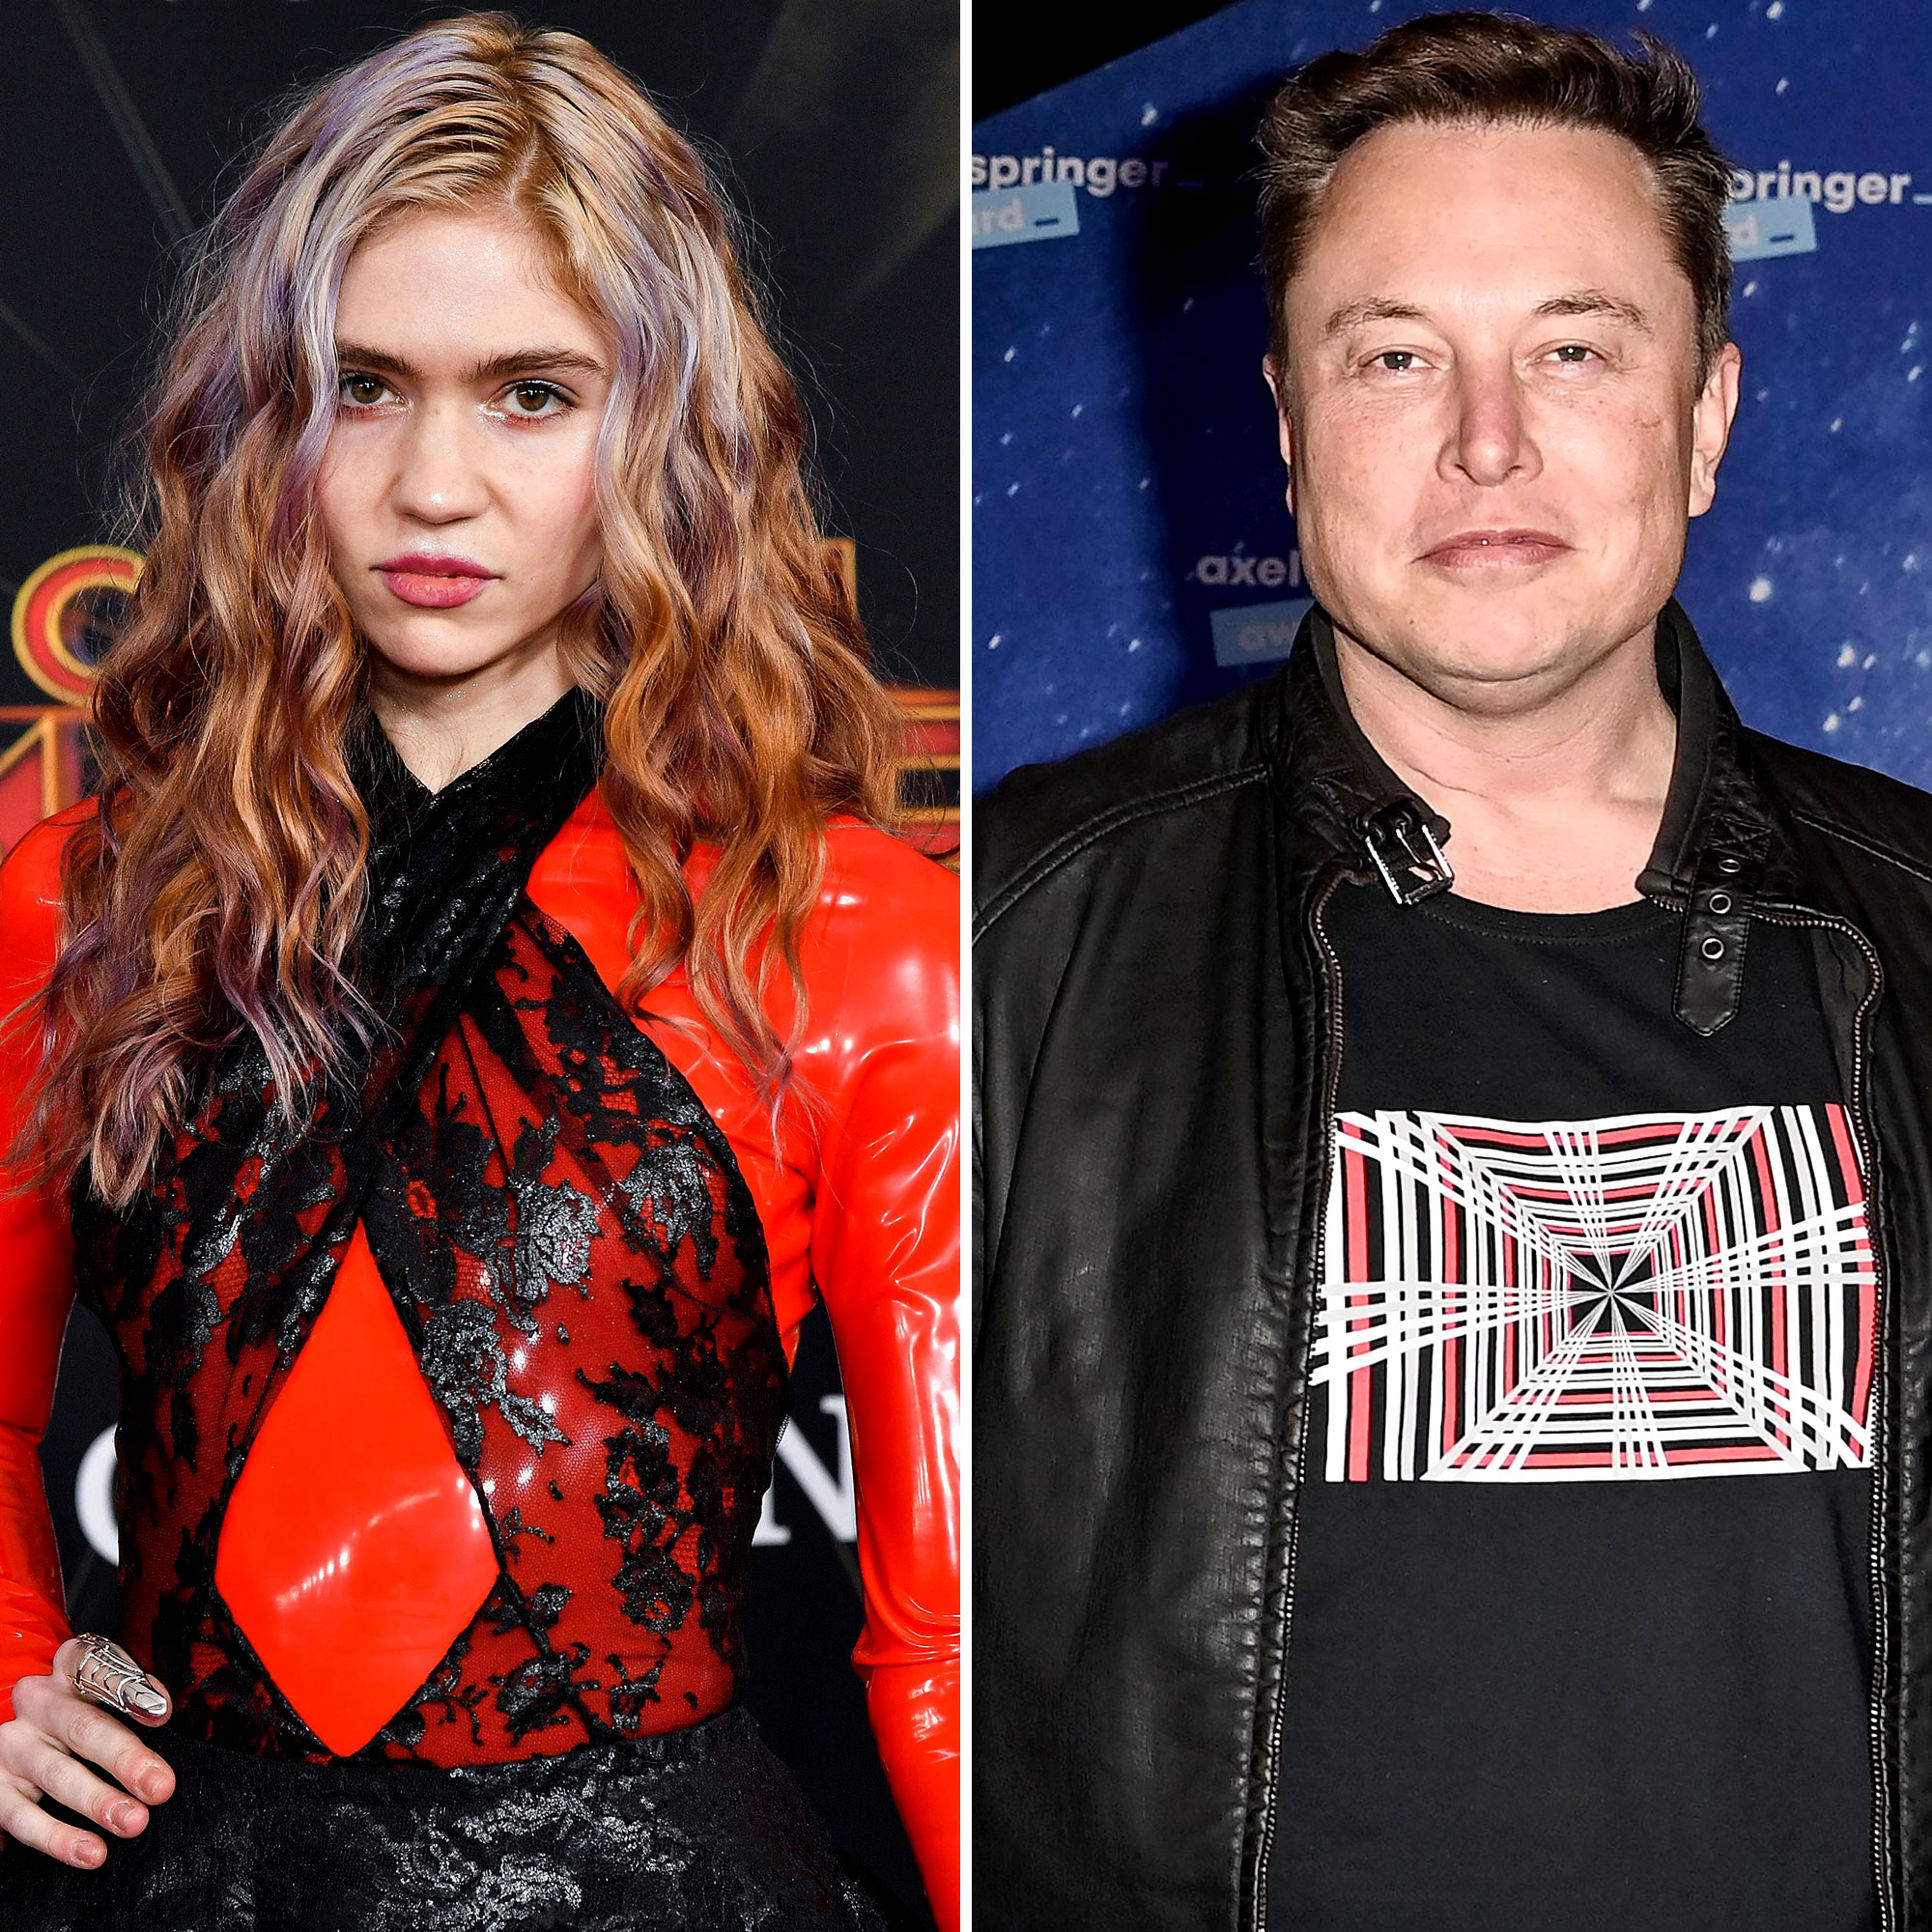 Elon Musk, Grimes' Relationship Timeline, From Meeting to 3 Kids